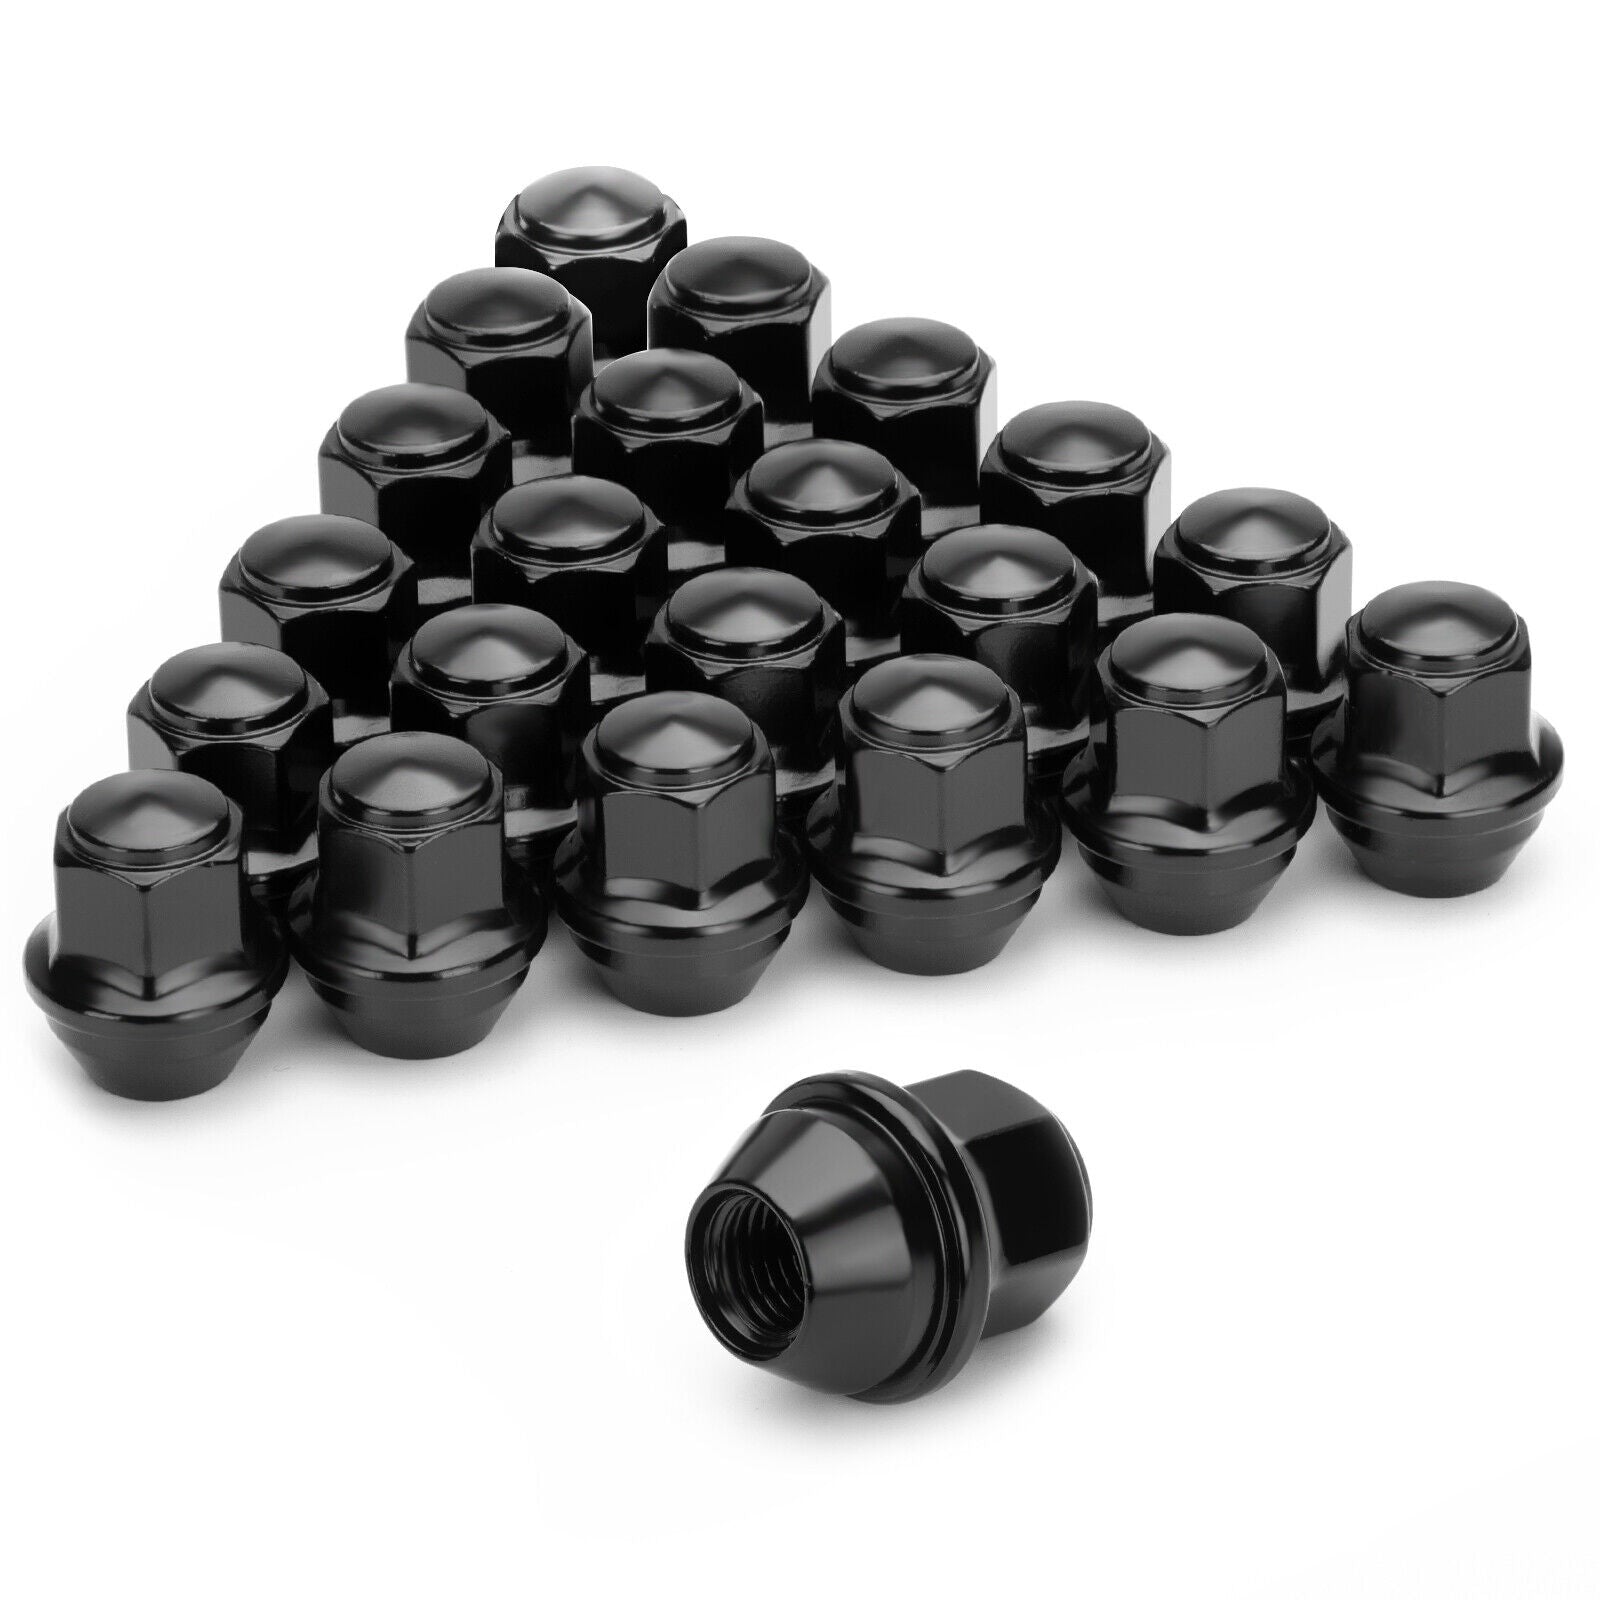 Buy black Lug Nuts 20pcs 12x1.5 OEM/Stock for Ford Focus Fusion Escape Fiesta